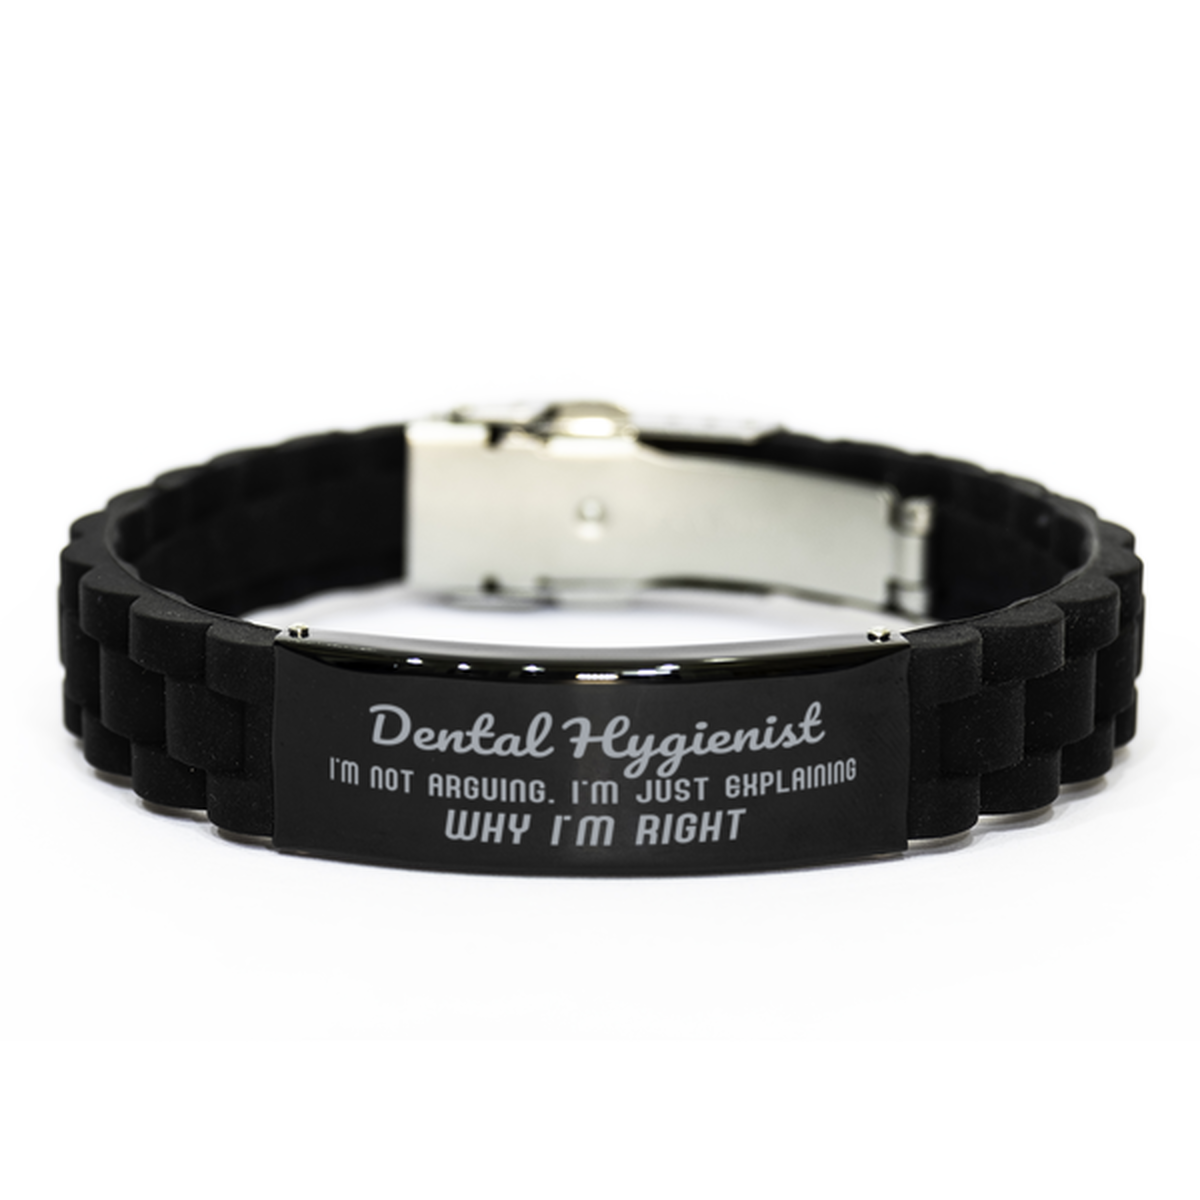 Dental Hygienist I'm not Arguing. I'm Just Explaining Why I'm RIGHT Black Glidelock Clasp Bracelet, Funny Saying Quote Dental Hygienist Gifts For Dental Hygienist Graduation Birthday Christmas Gifts for Men Women Coworker